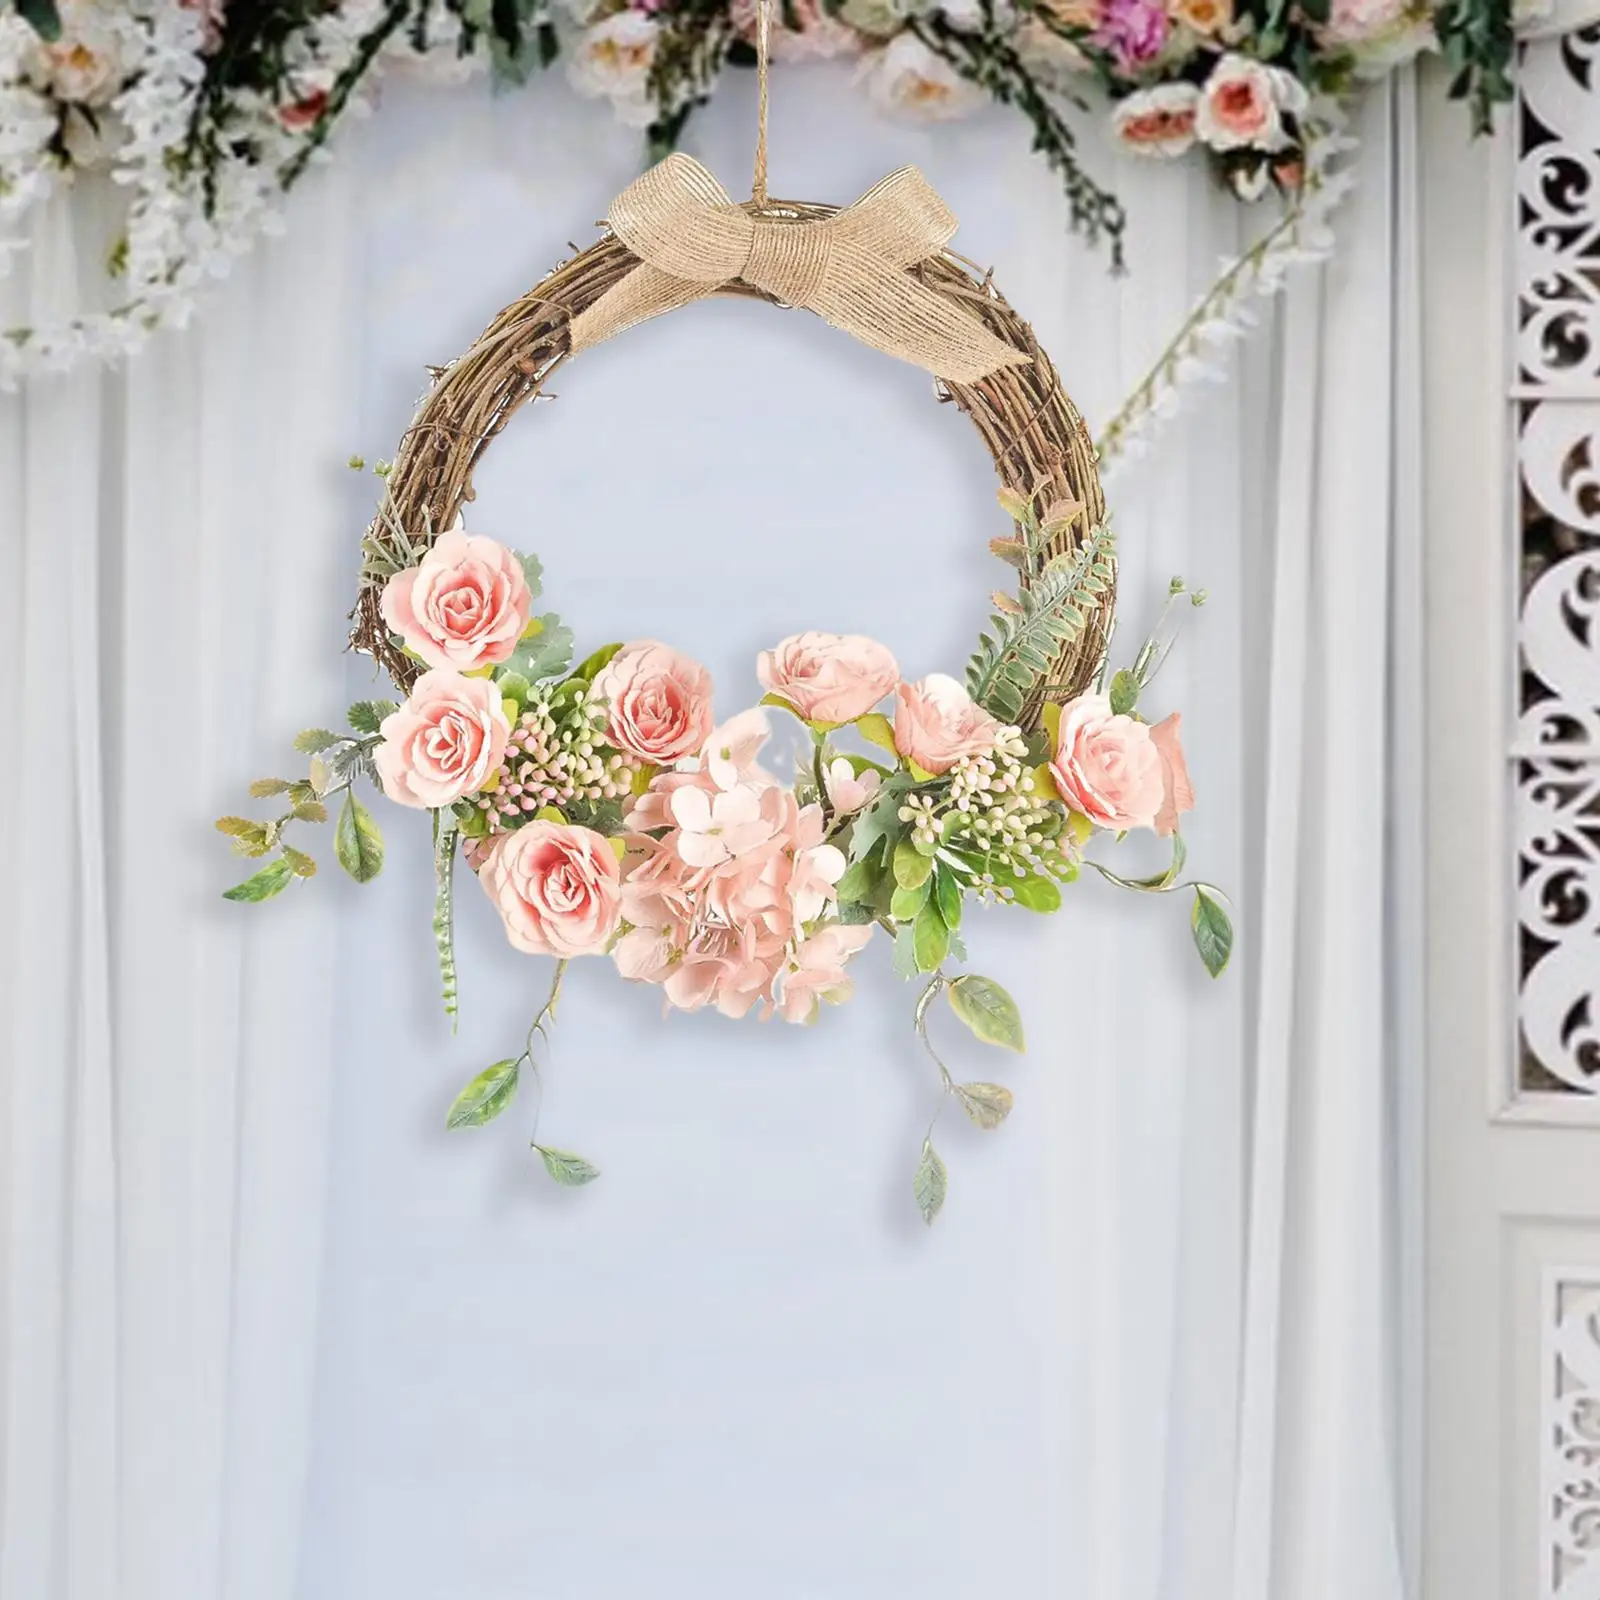 Simulation 13inch Flower Wreath Spring Front Door Greenery Garland Indoor Wedding Party Fireplace Ornament Decoration